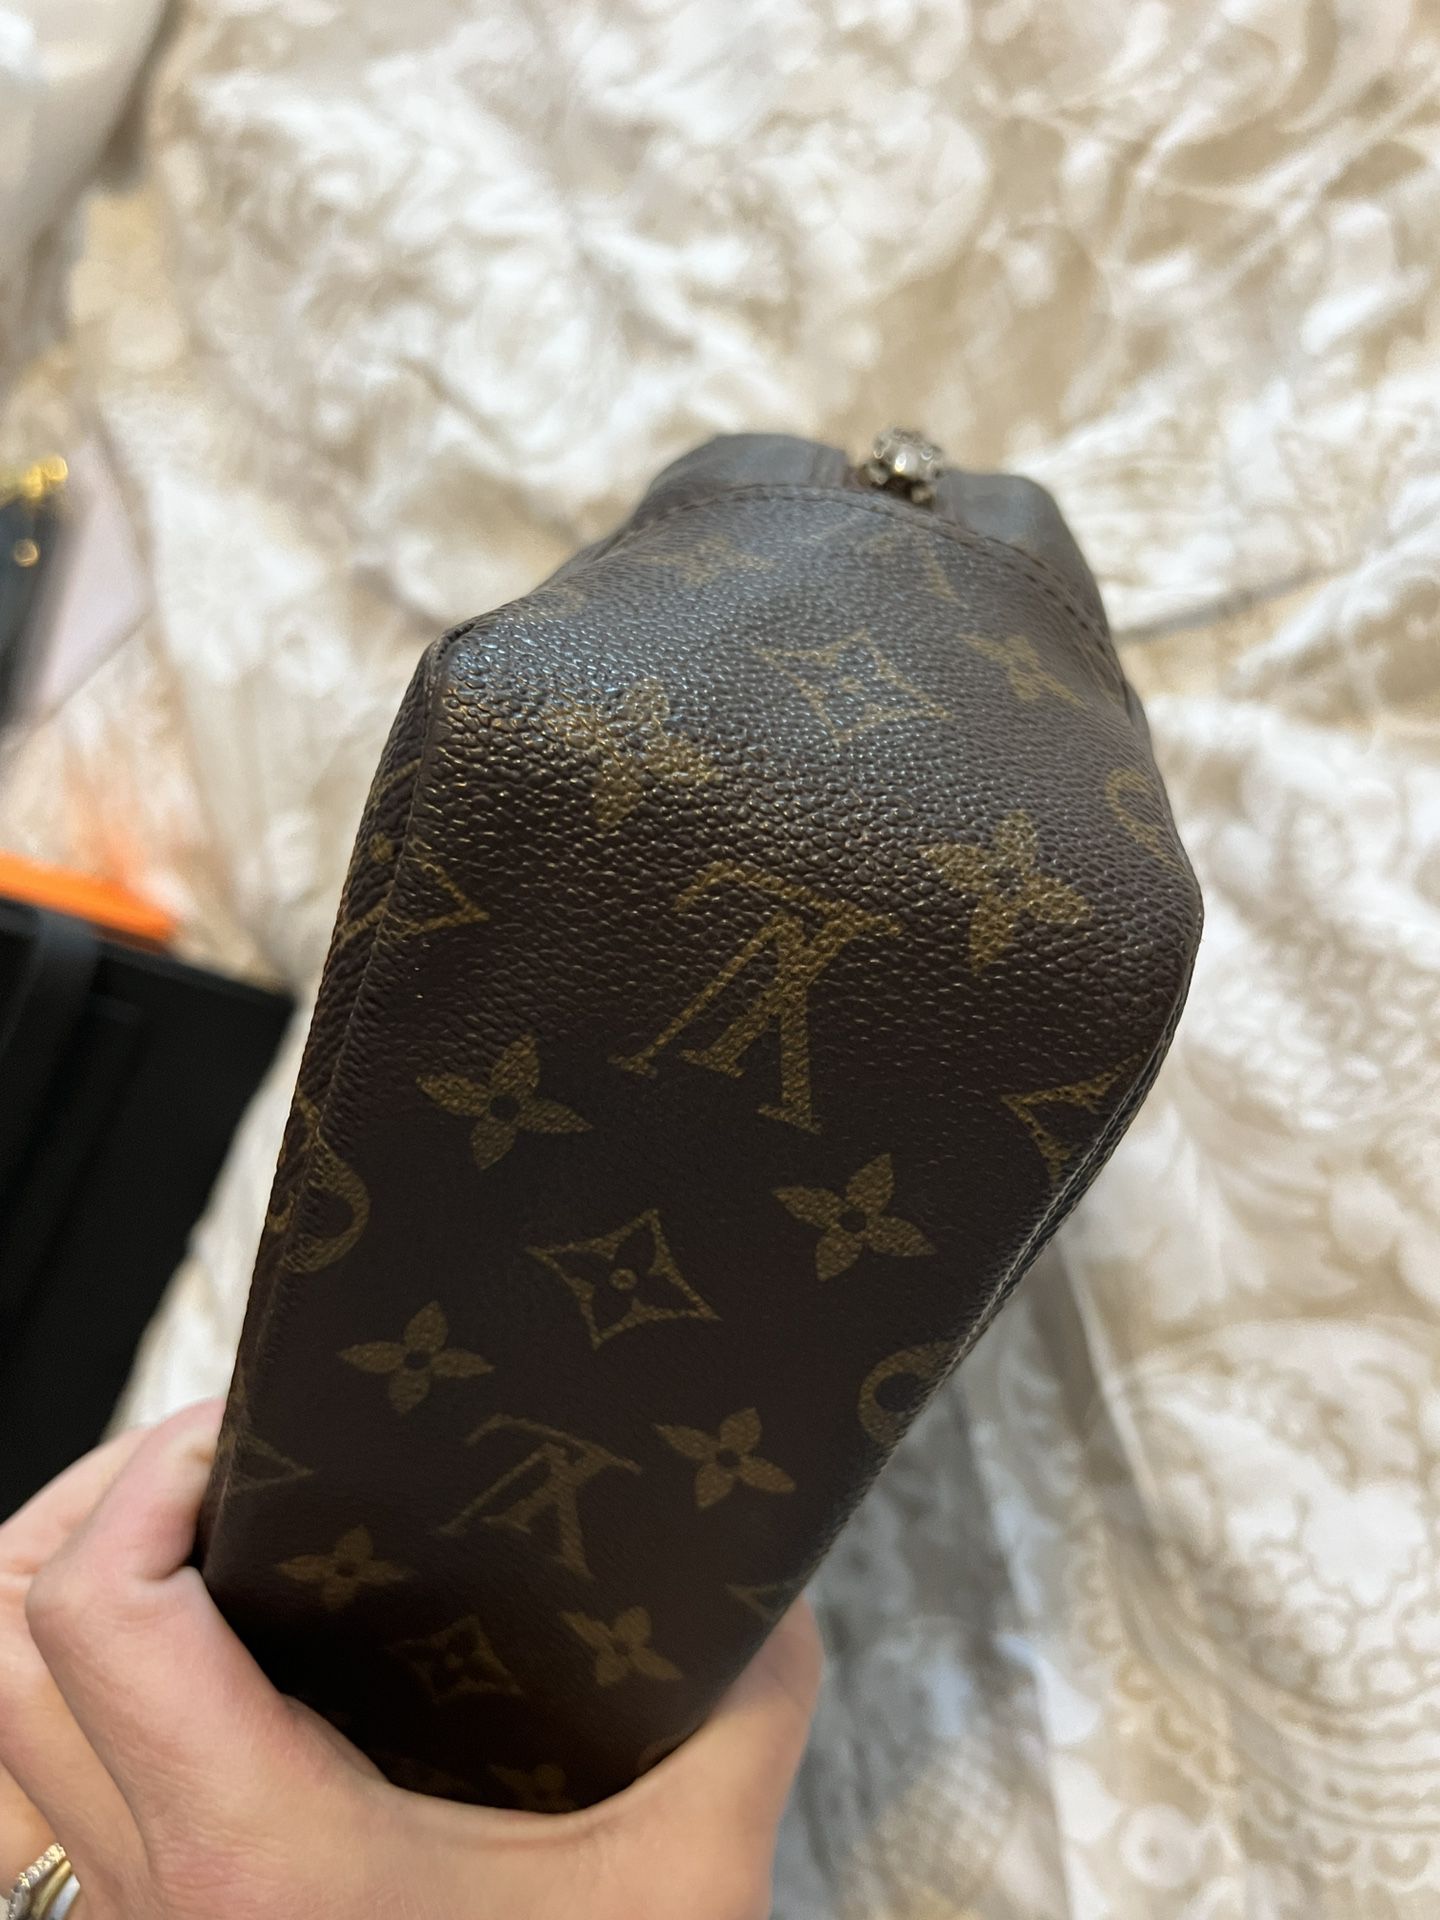 LV Passport Wallet for Sale in Leominster, MA - OfferUp